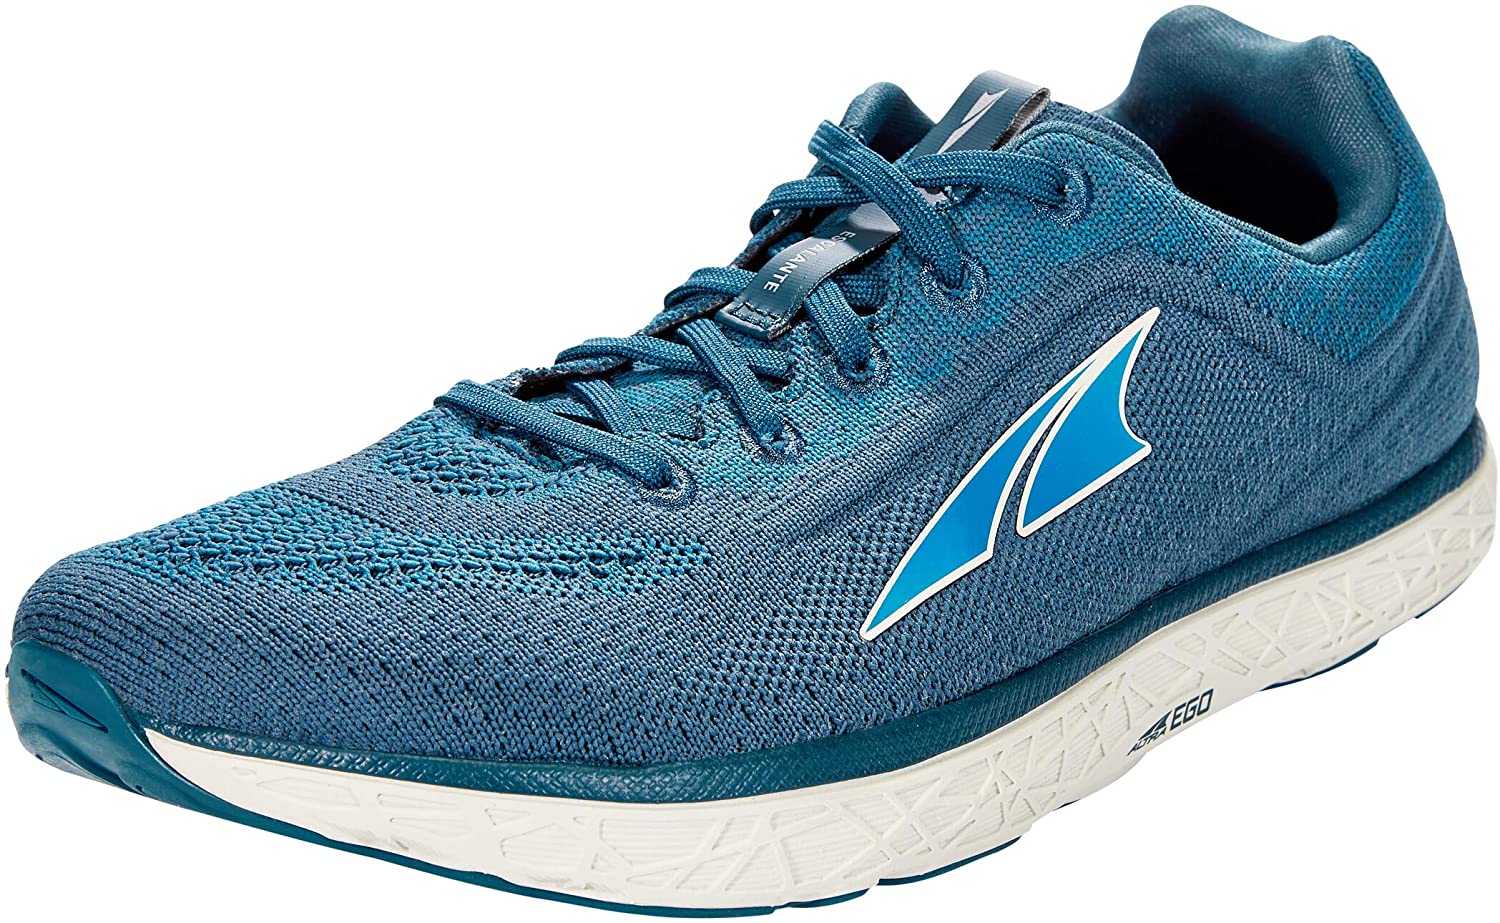 Altra Men's Escalante 2.5 Road Running Shoe in Majolica Blue from the side